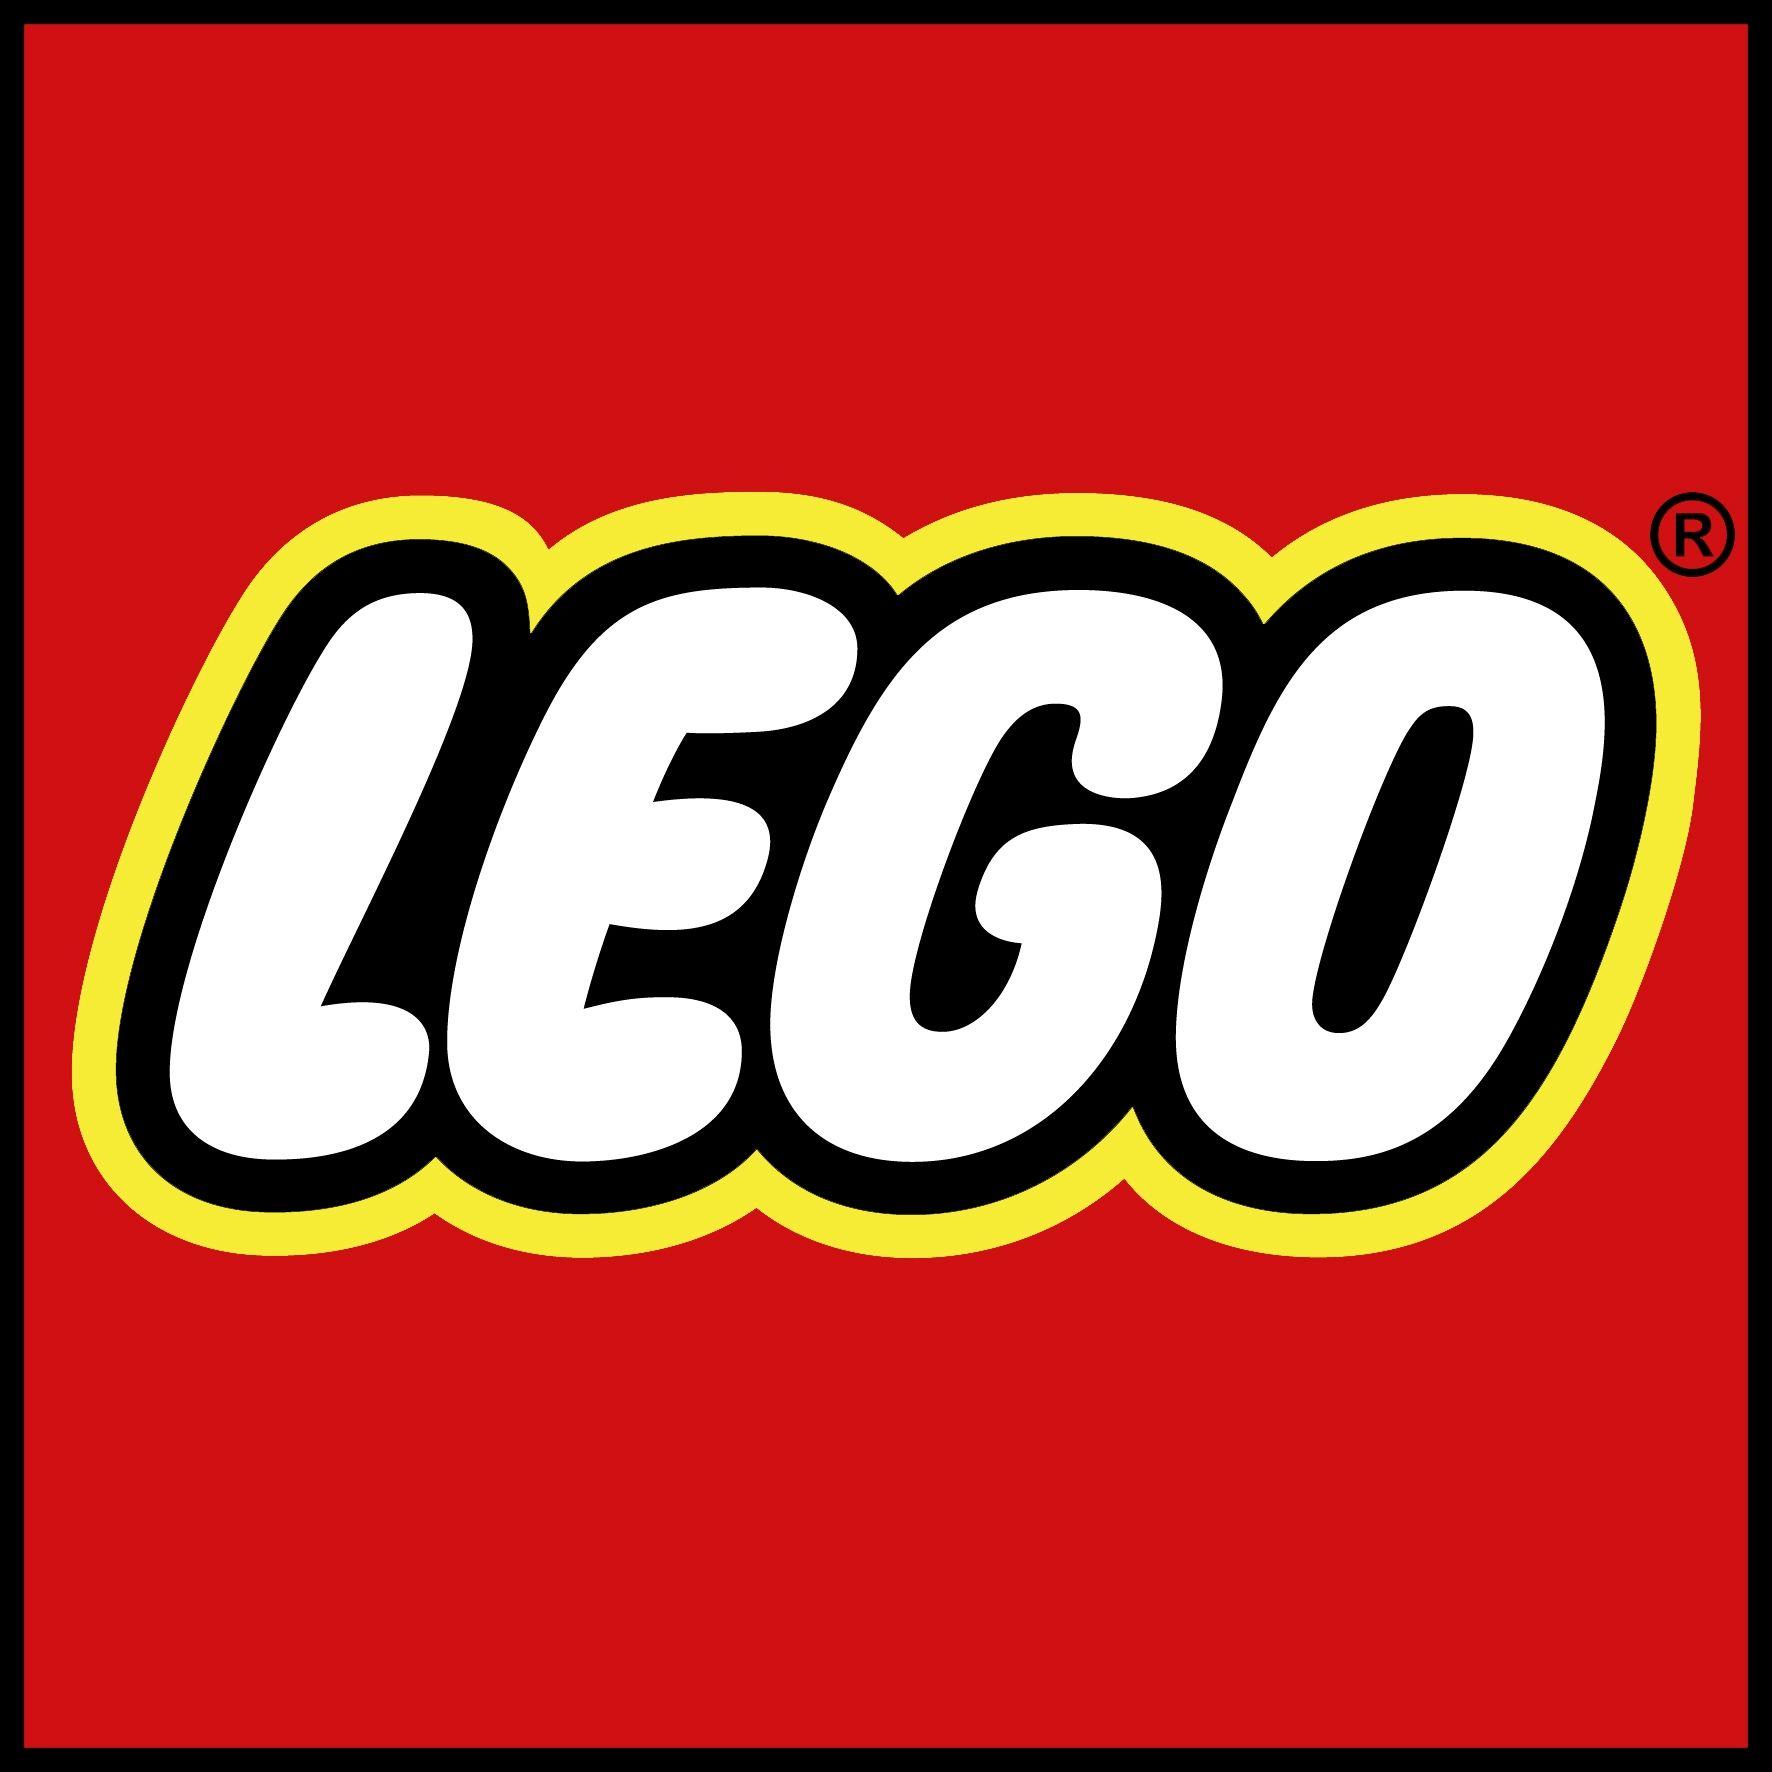 Lego.com Logo - The LEGO Group maintains rank as the 2nd most highly regarded ...